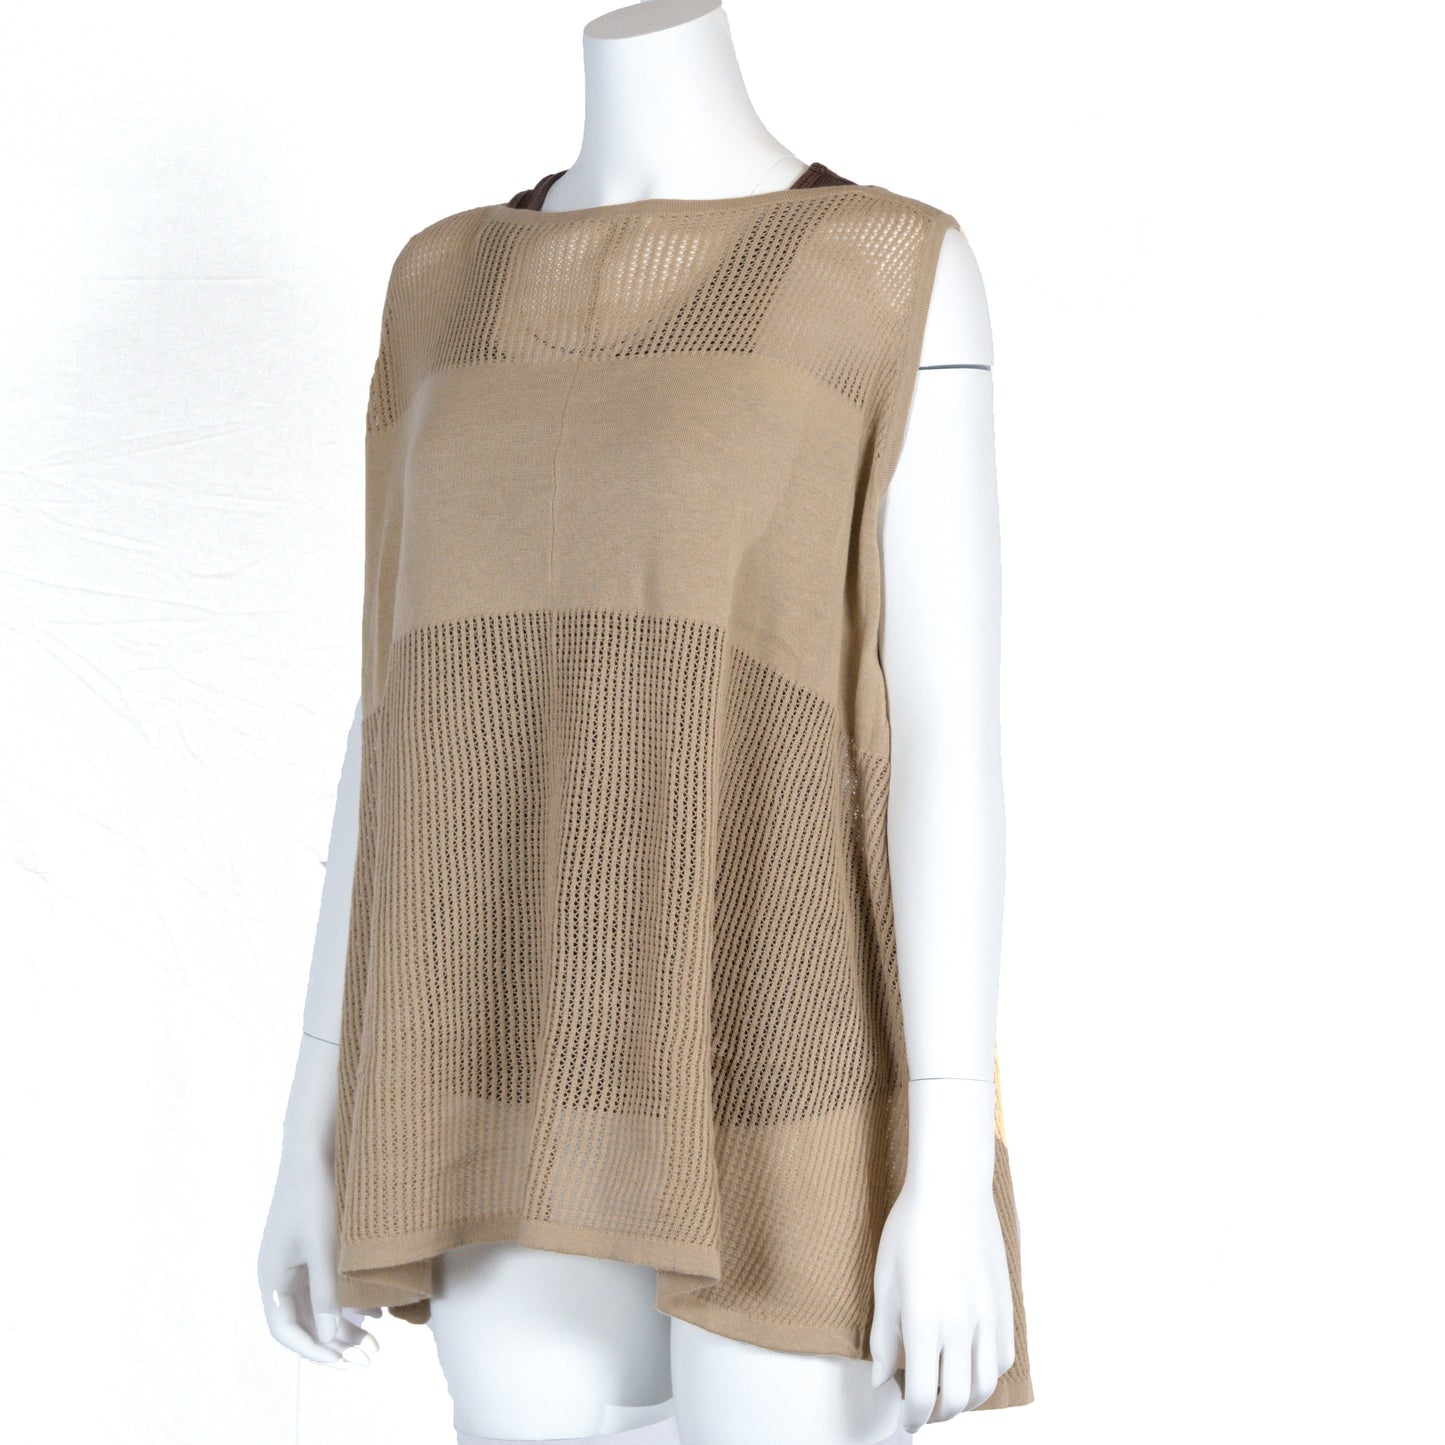 Sleeveless poncho in Taupe, opaque bandeau for nursing privacy